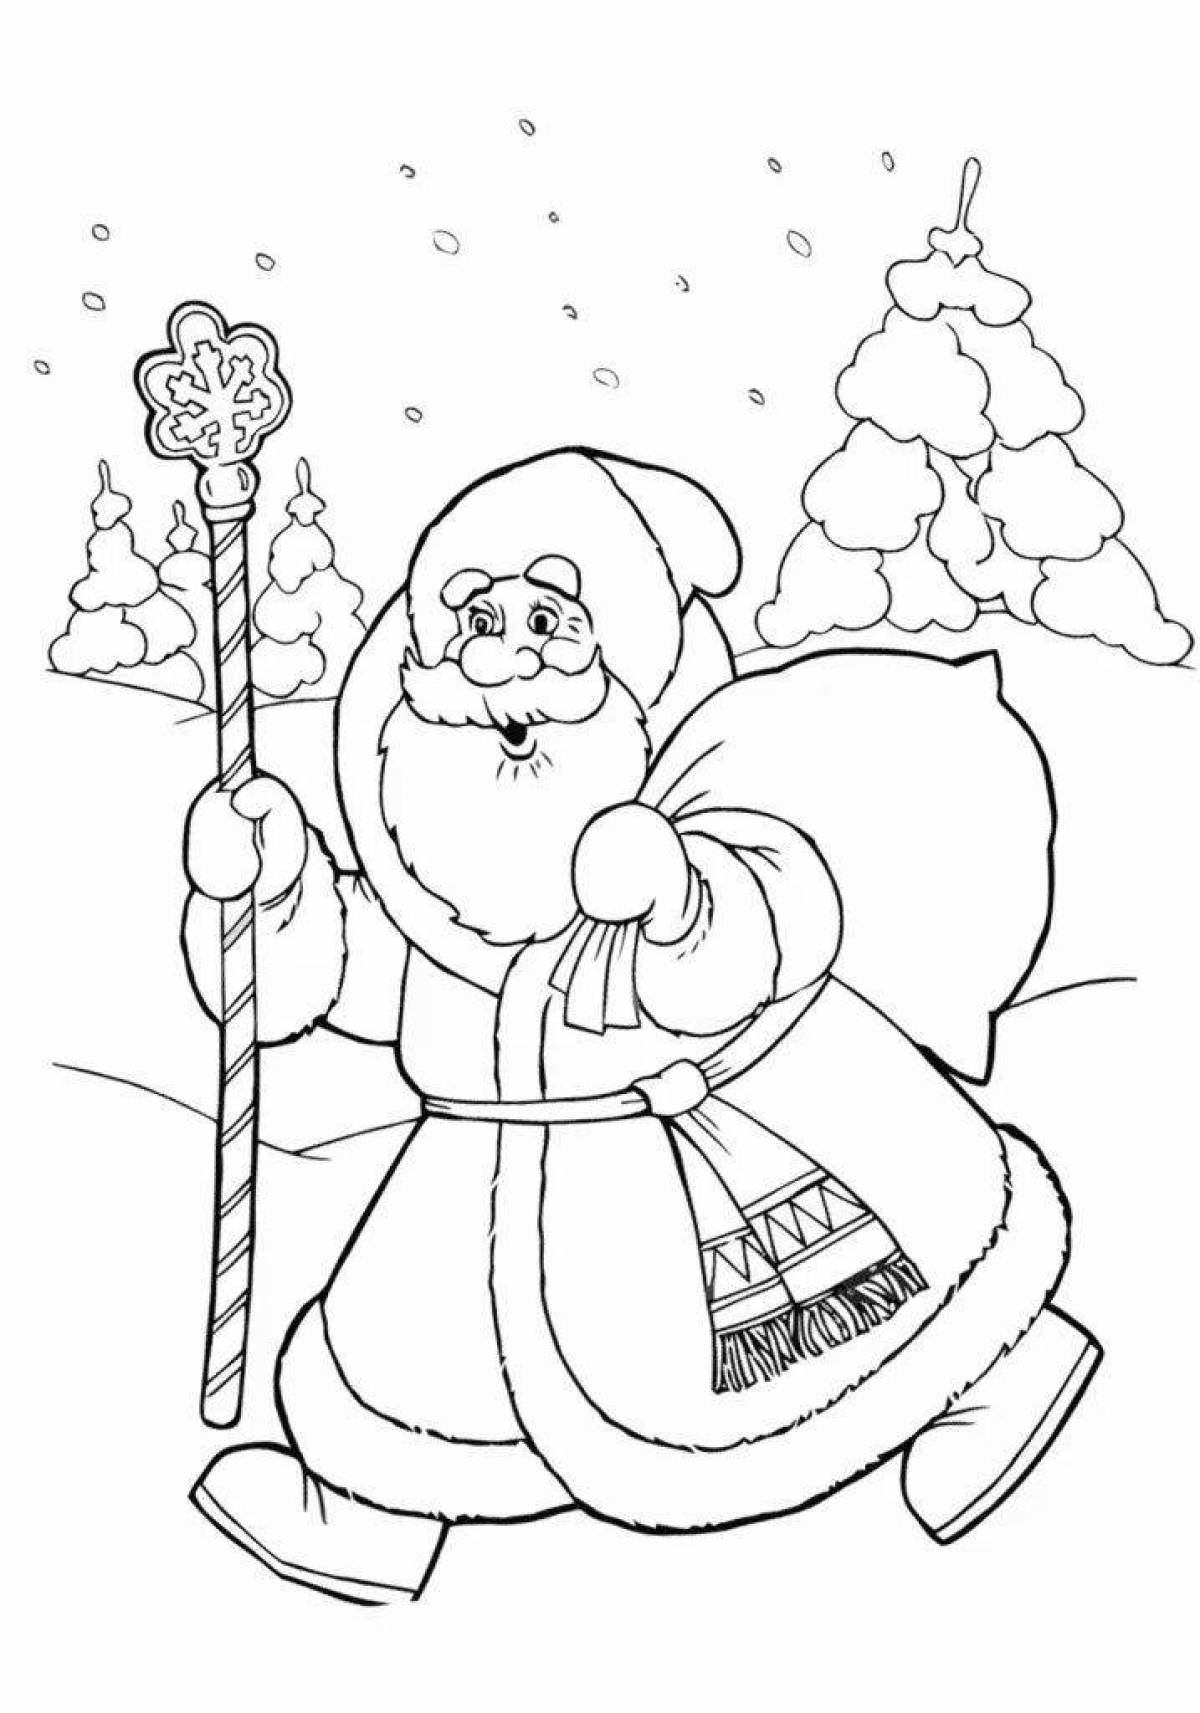 Coloring book fabulous frost ivanovich